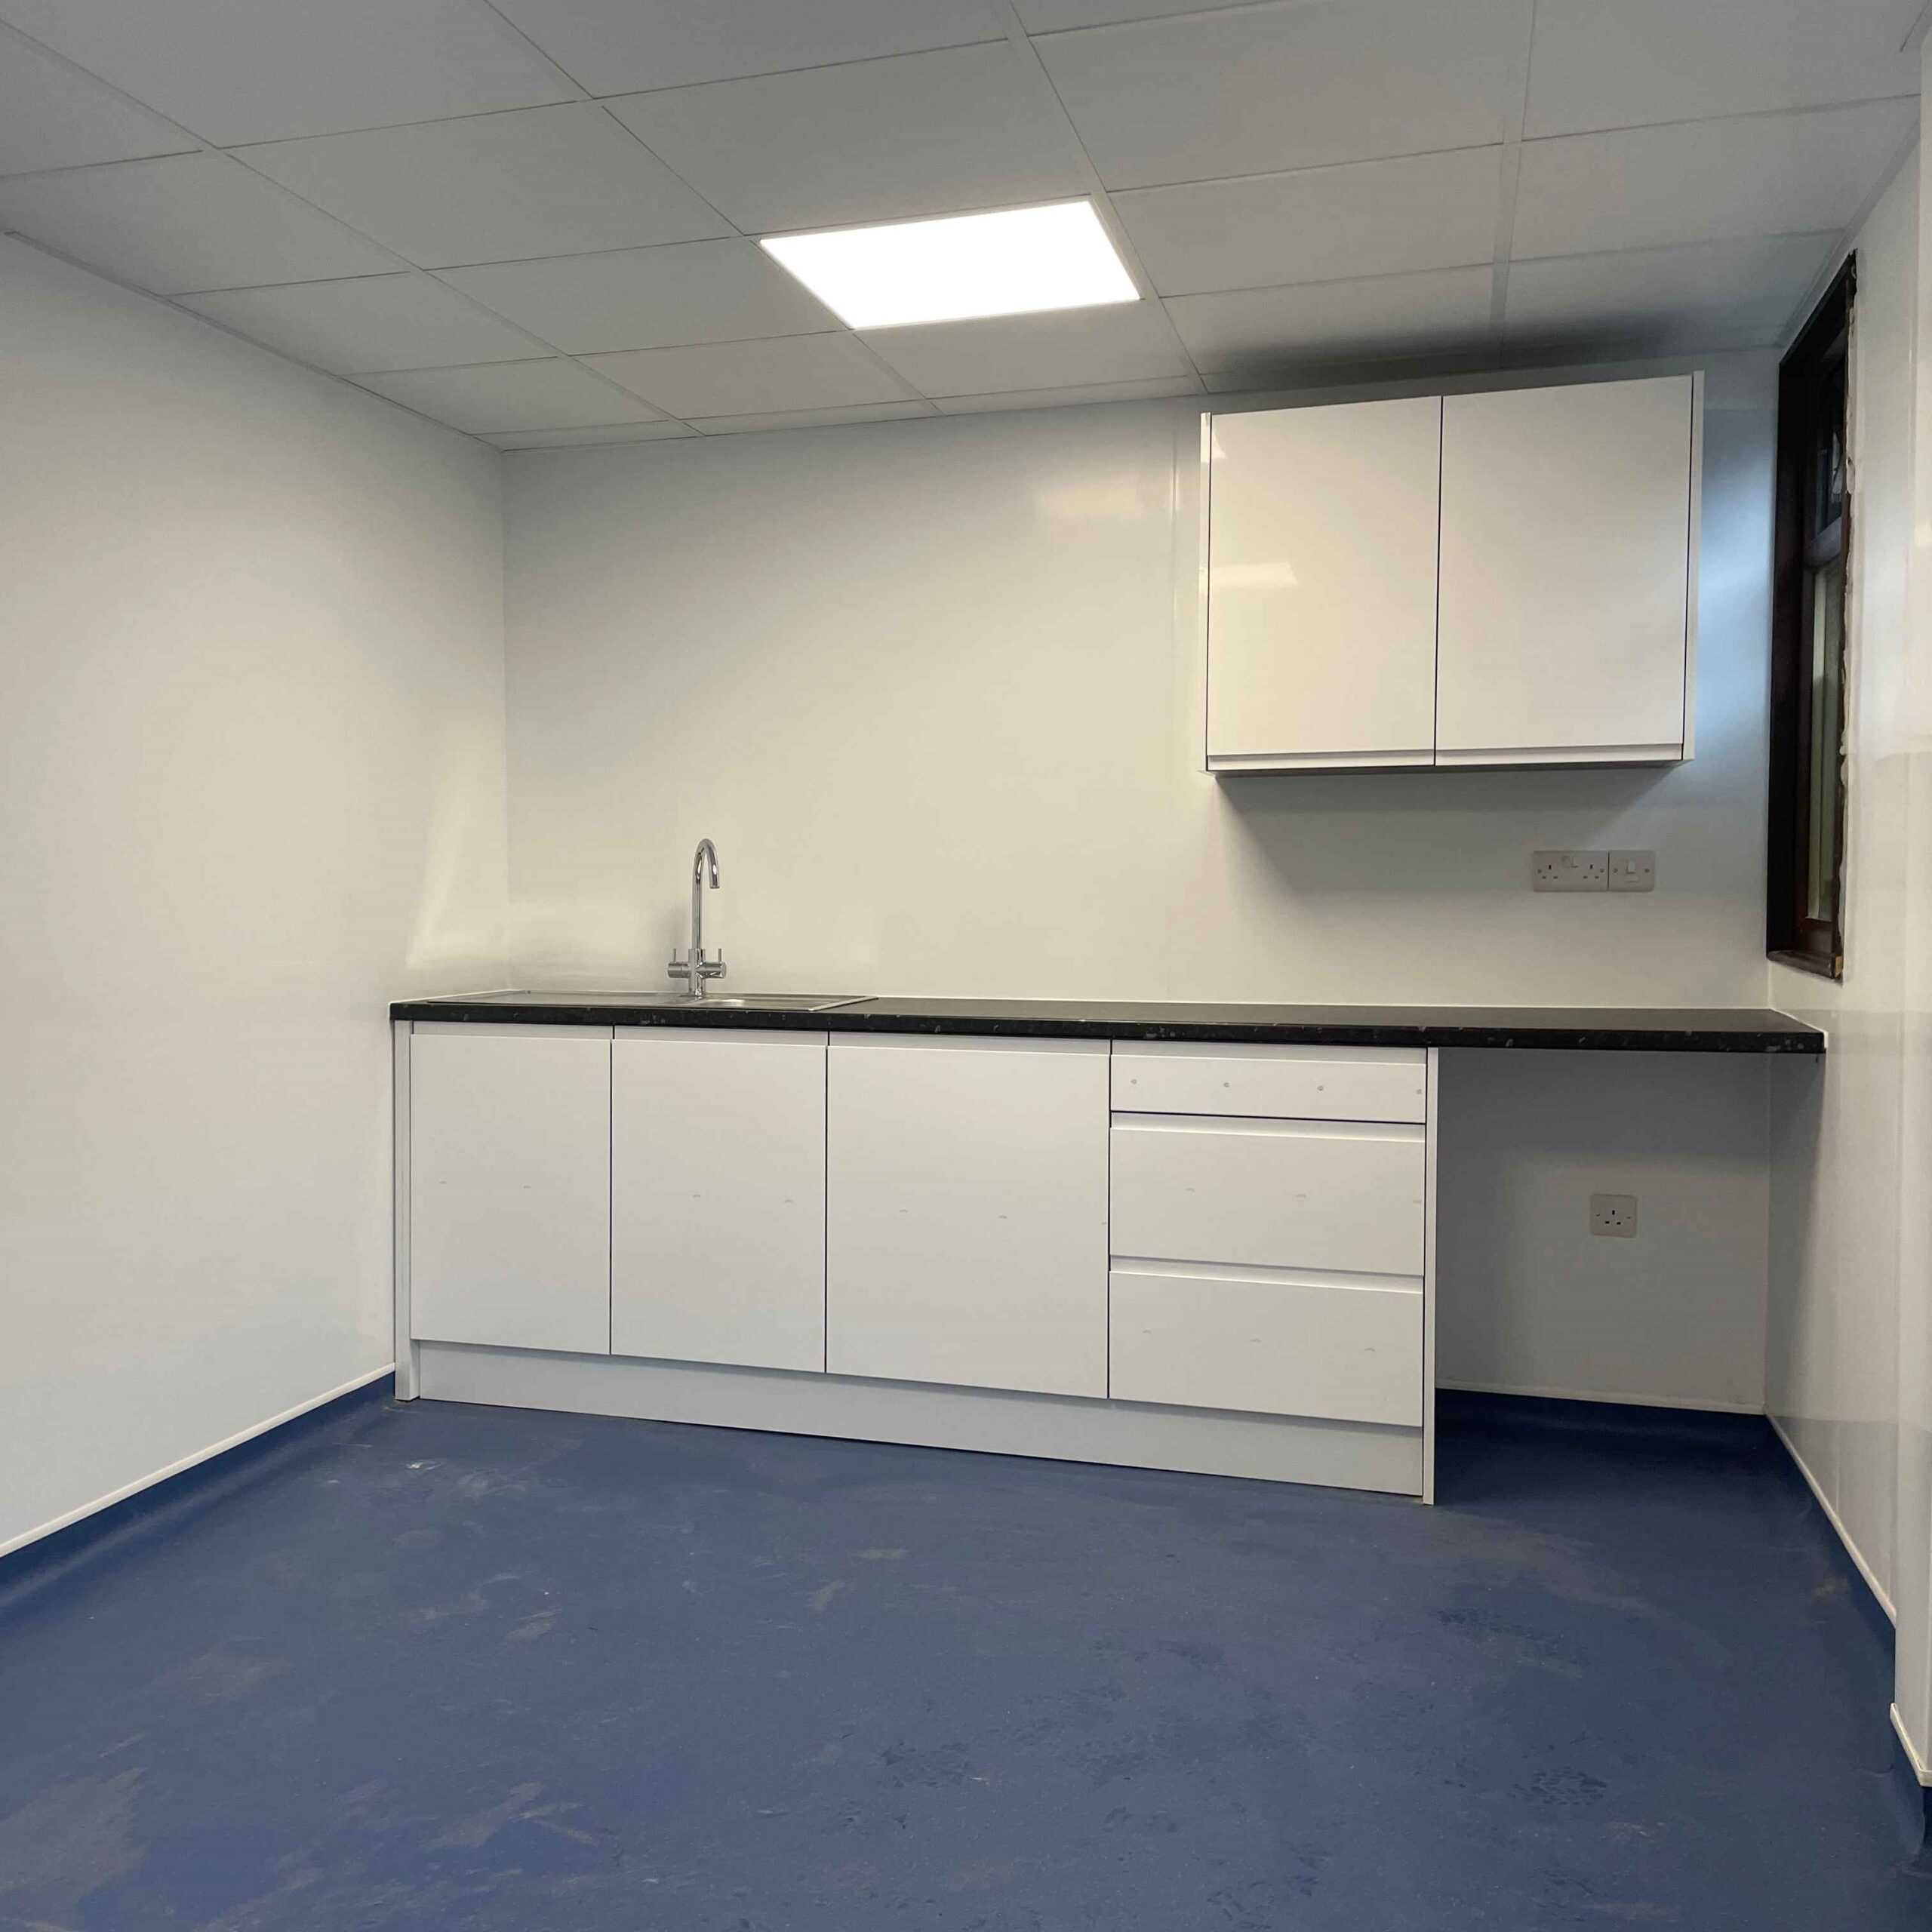 Commercial Kitchen Wall Cladding Building & Refurbishment Contractor